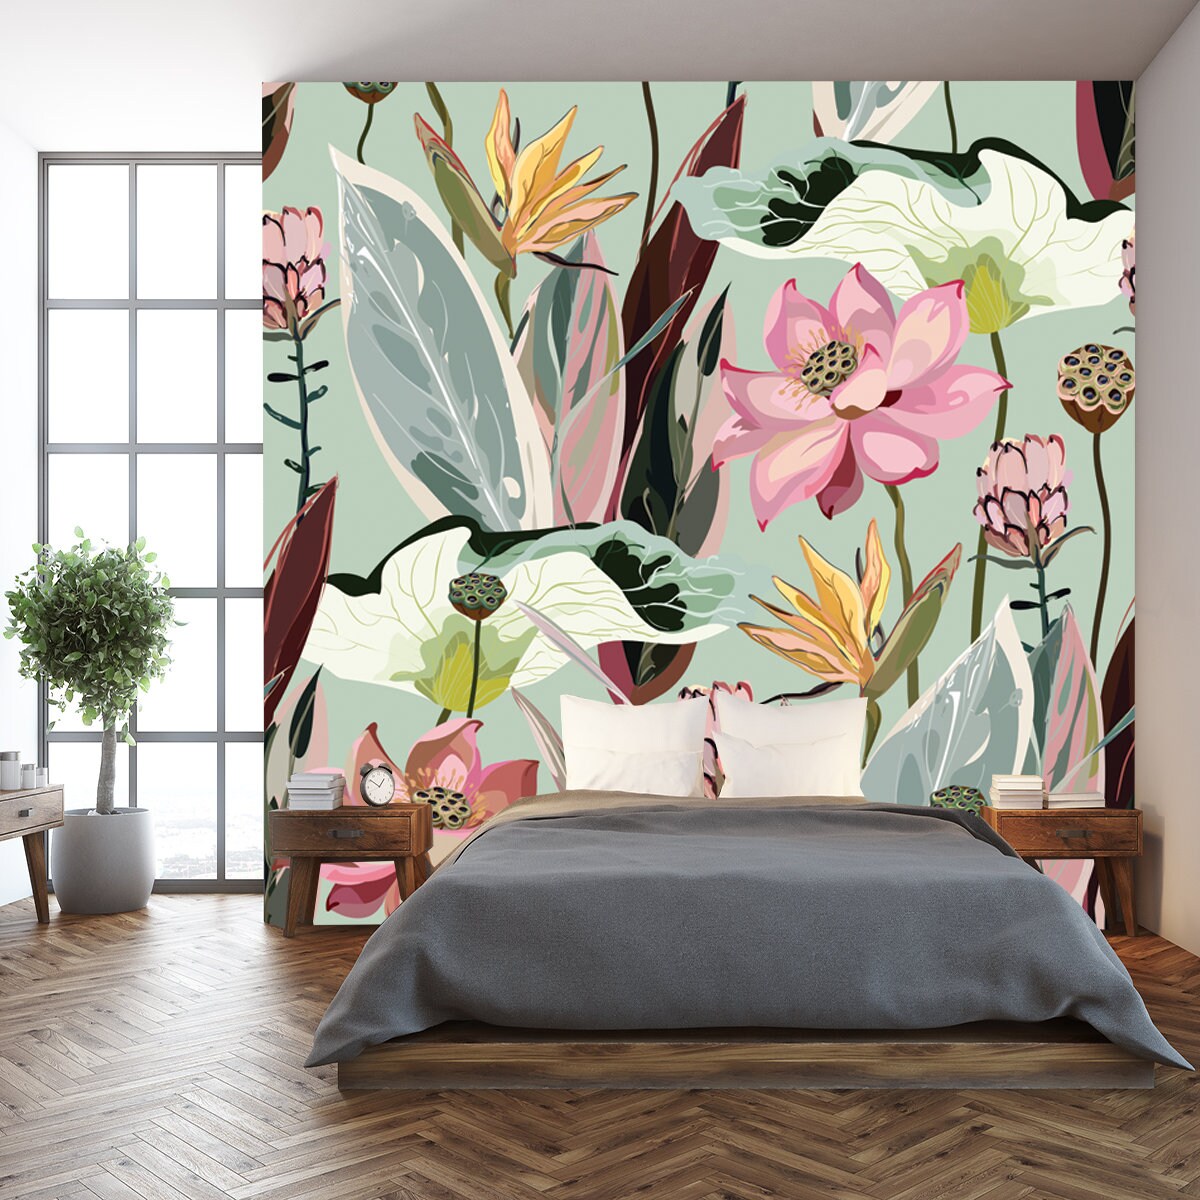 Large Flowers, Inflorescences, Buds and Lotus Leaves, Strelitzia and Proteus on a Light Sage Green Background Wallpaper Bedroom Mural